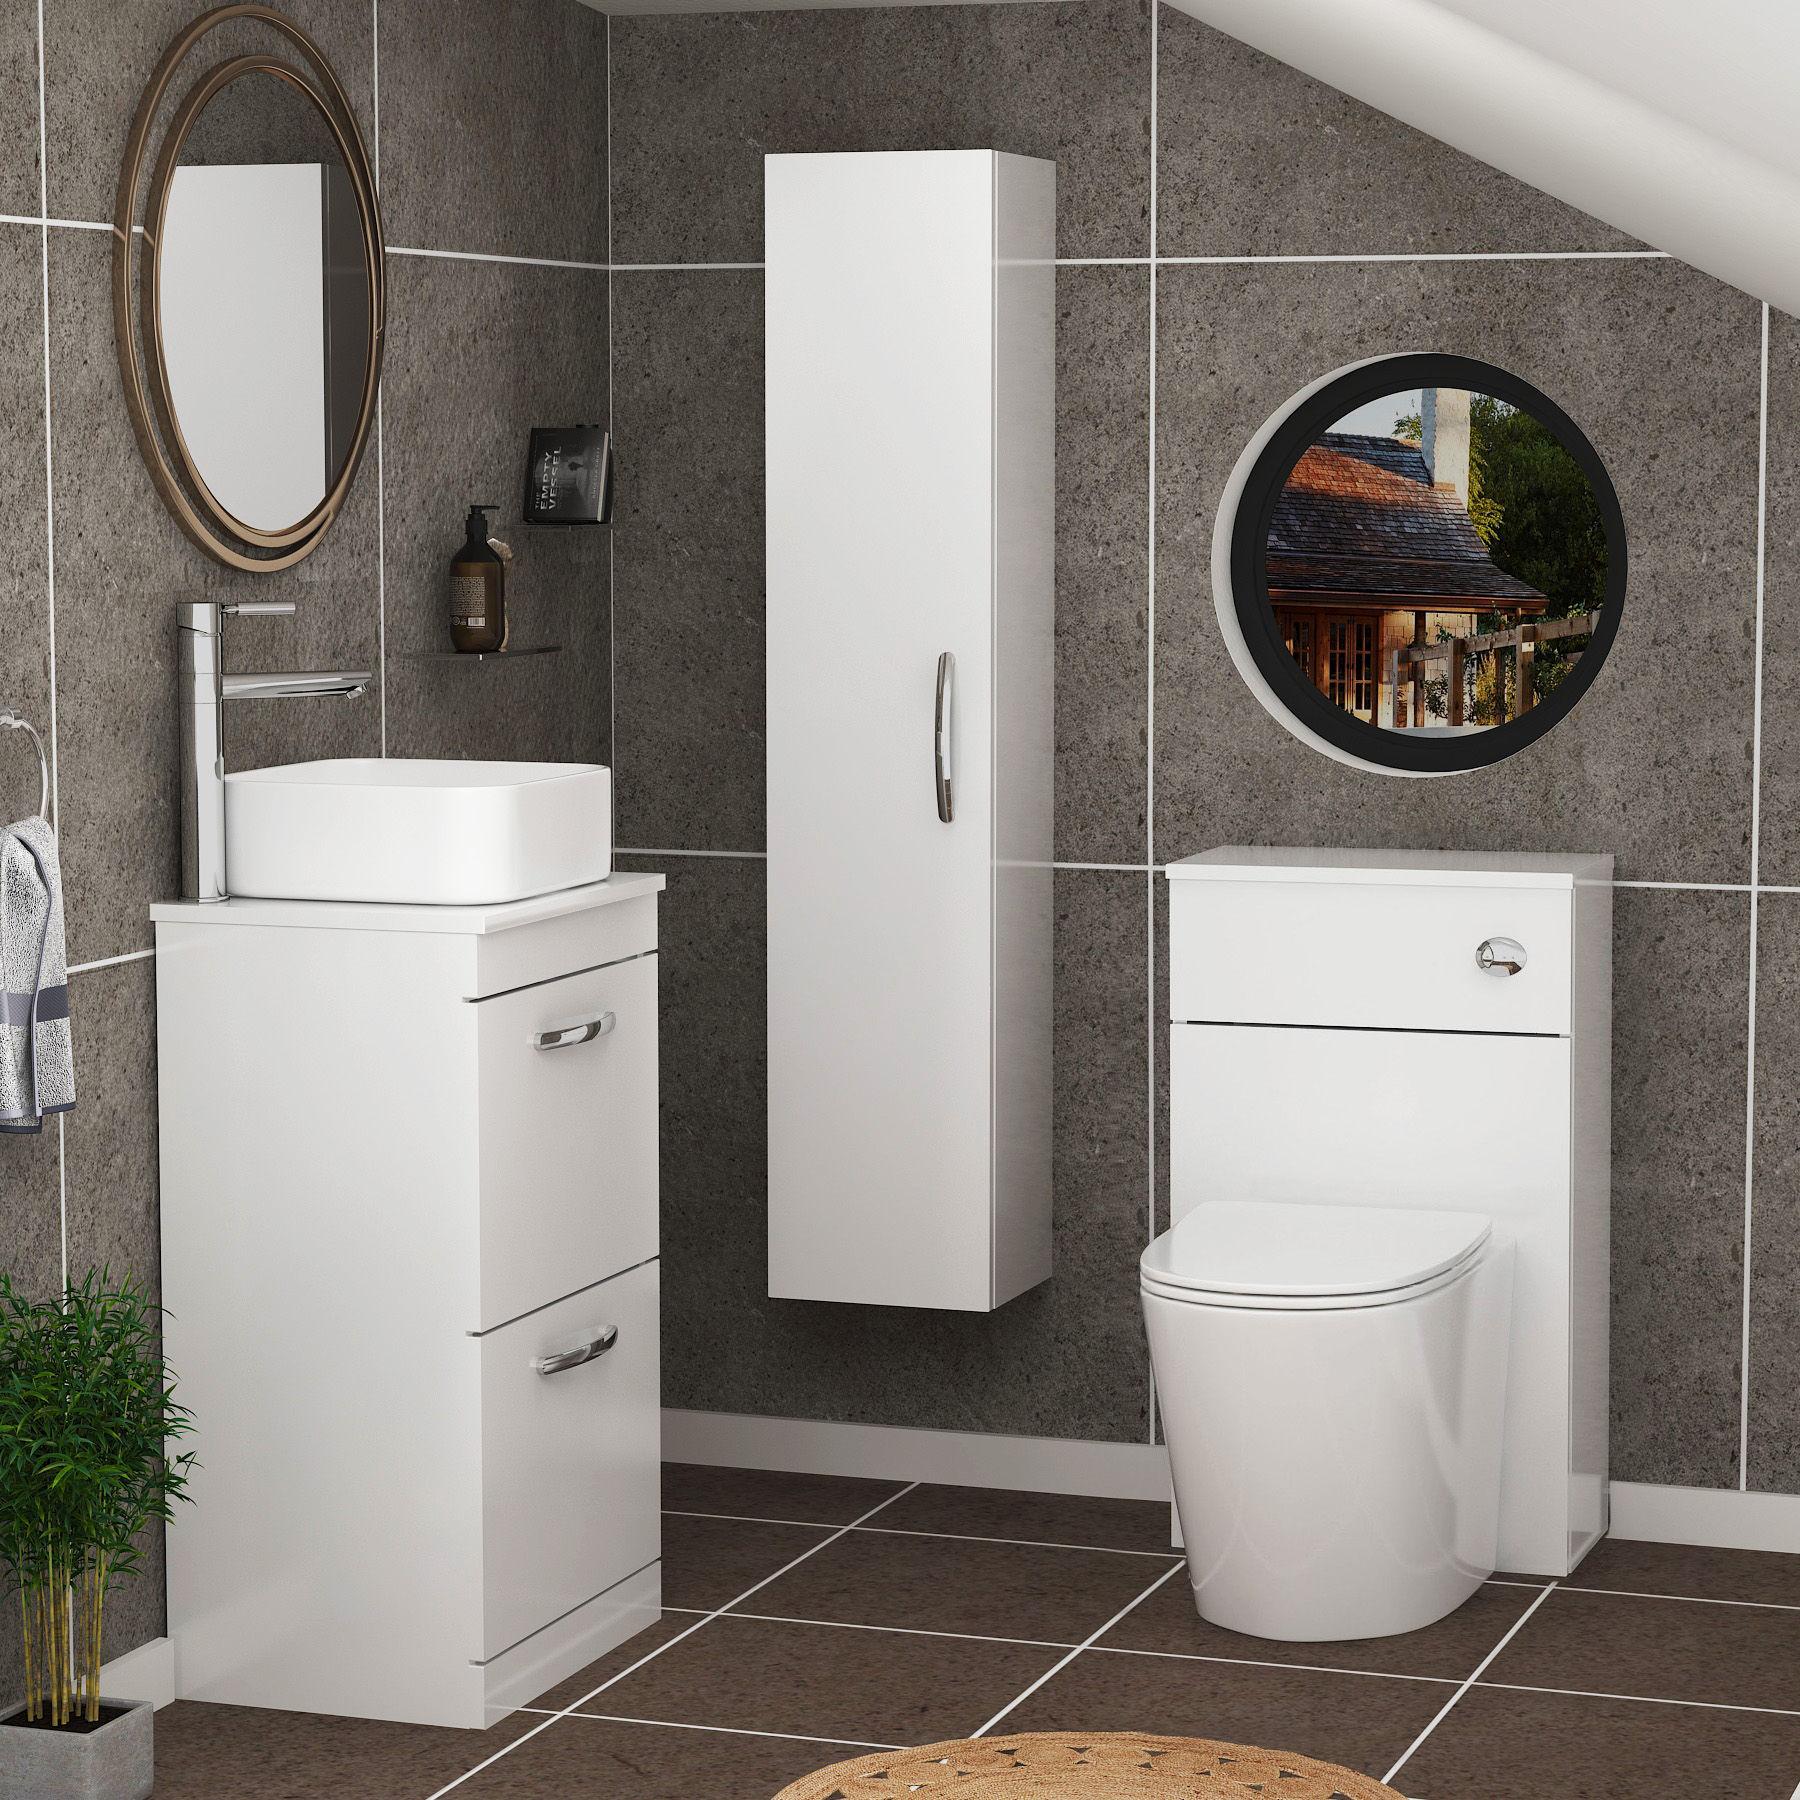 3 Reasons Why You Should Buy a White Vanity Unit with Basin